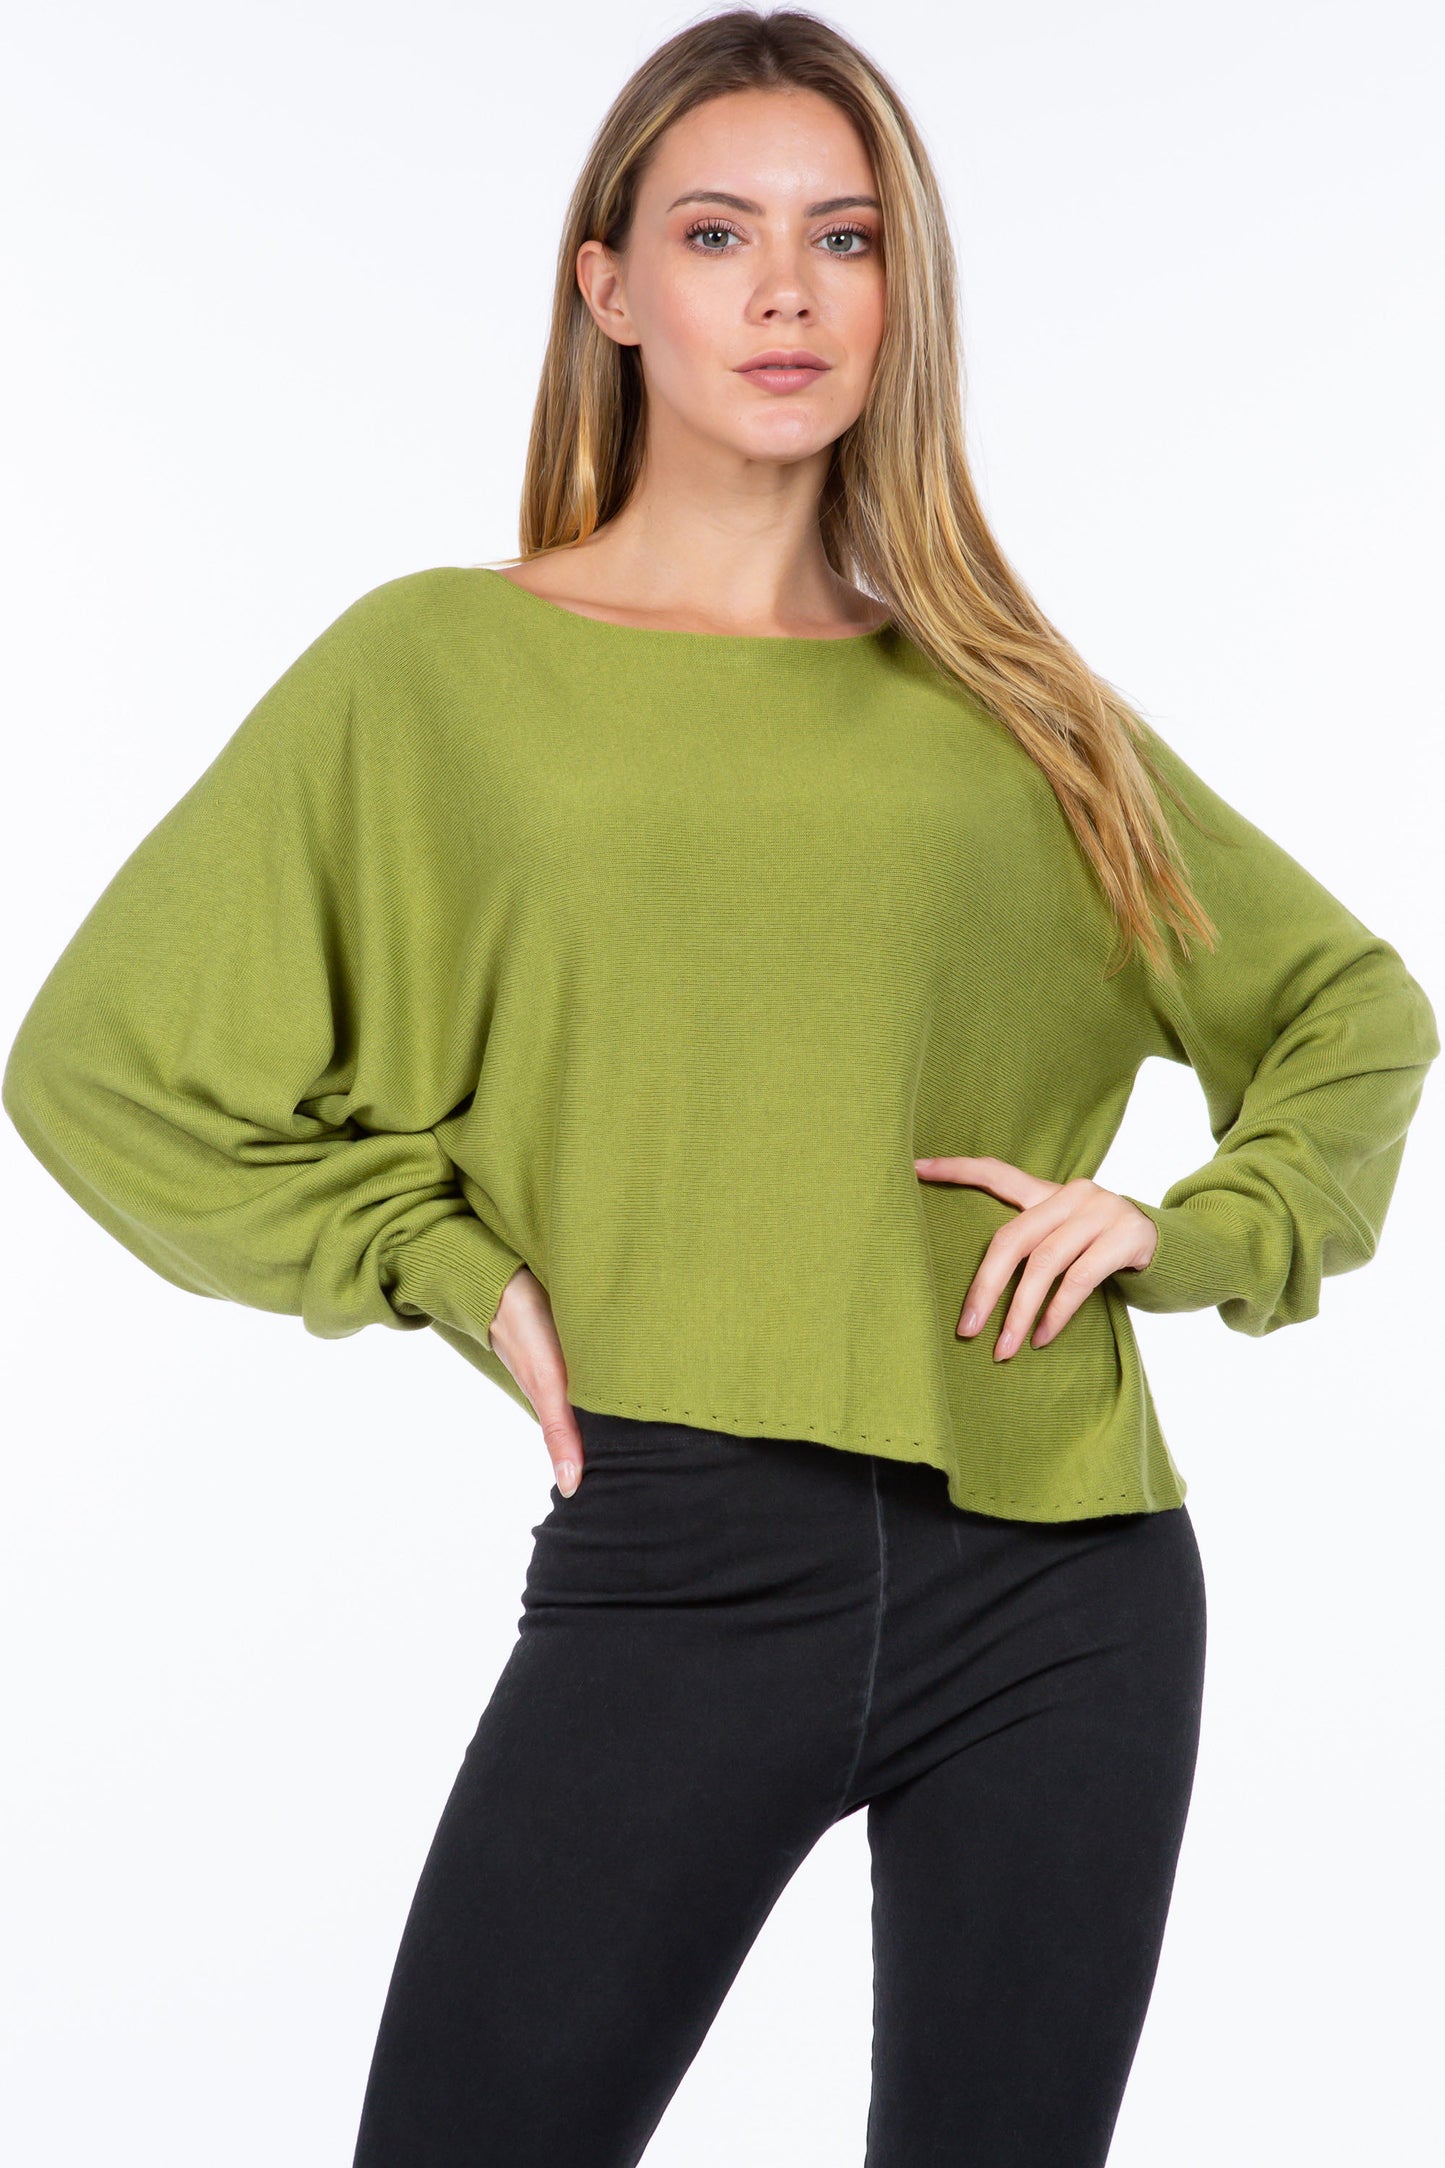 Sustainable Asymmetrical Crop Top Sweater